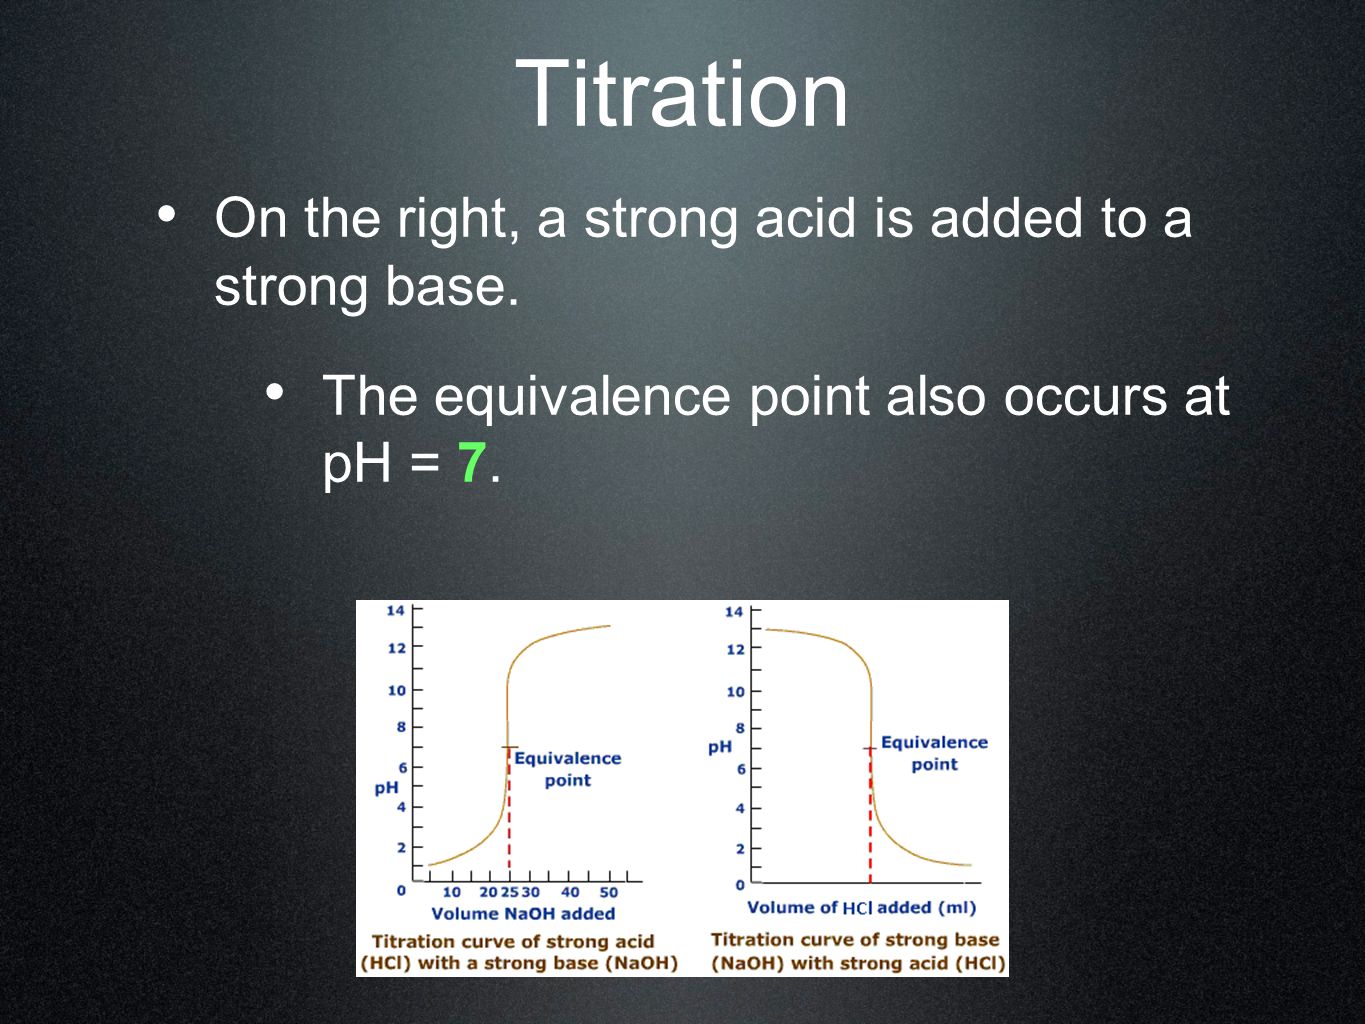 Titration On the right, a strong acid is added to a strong base.